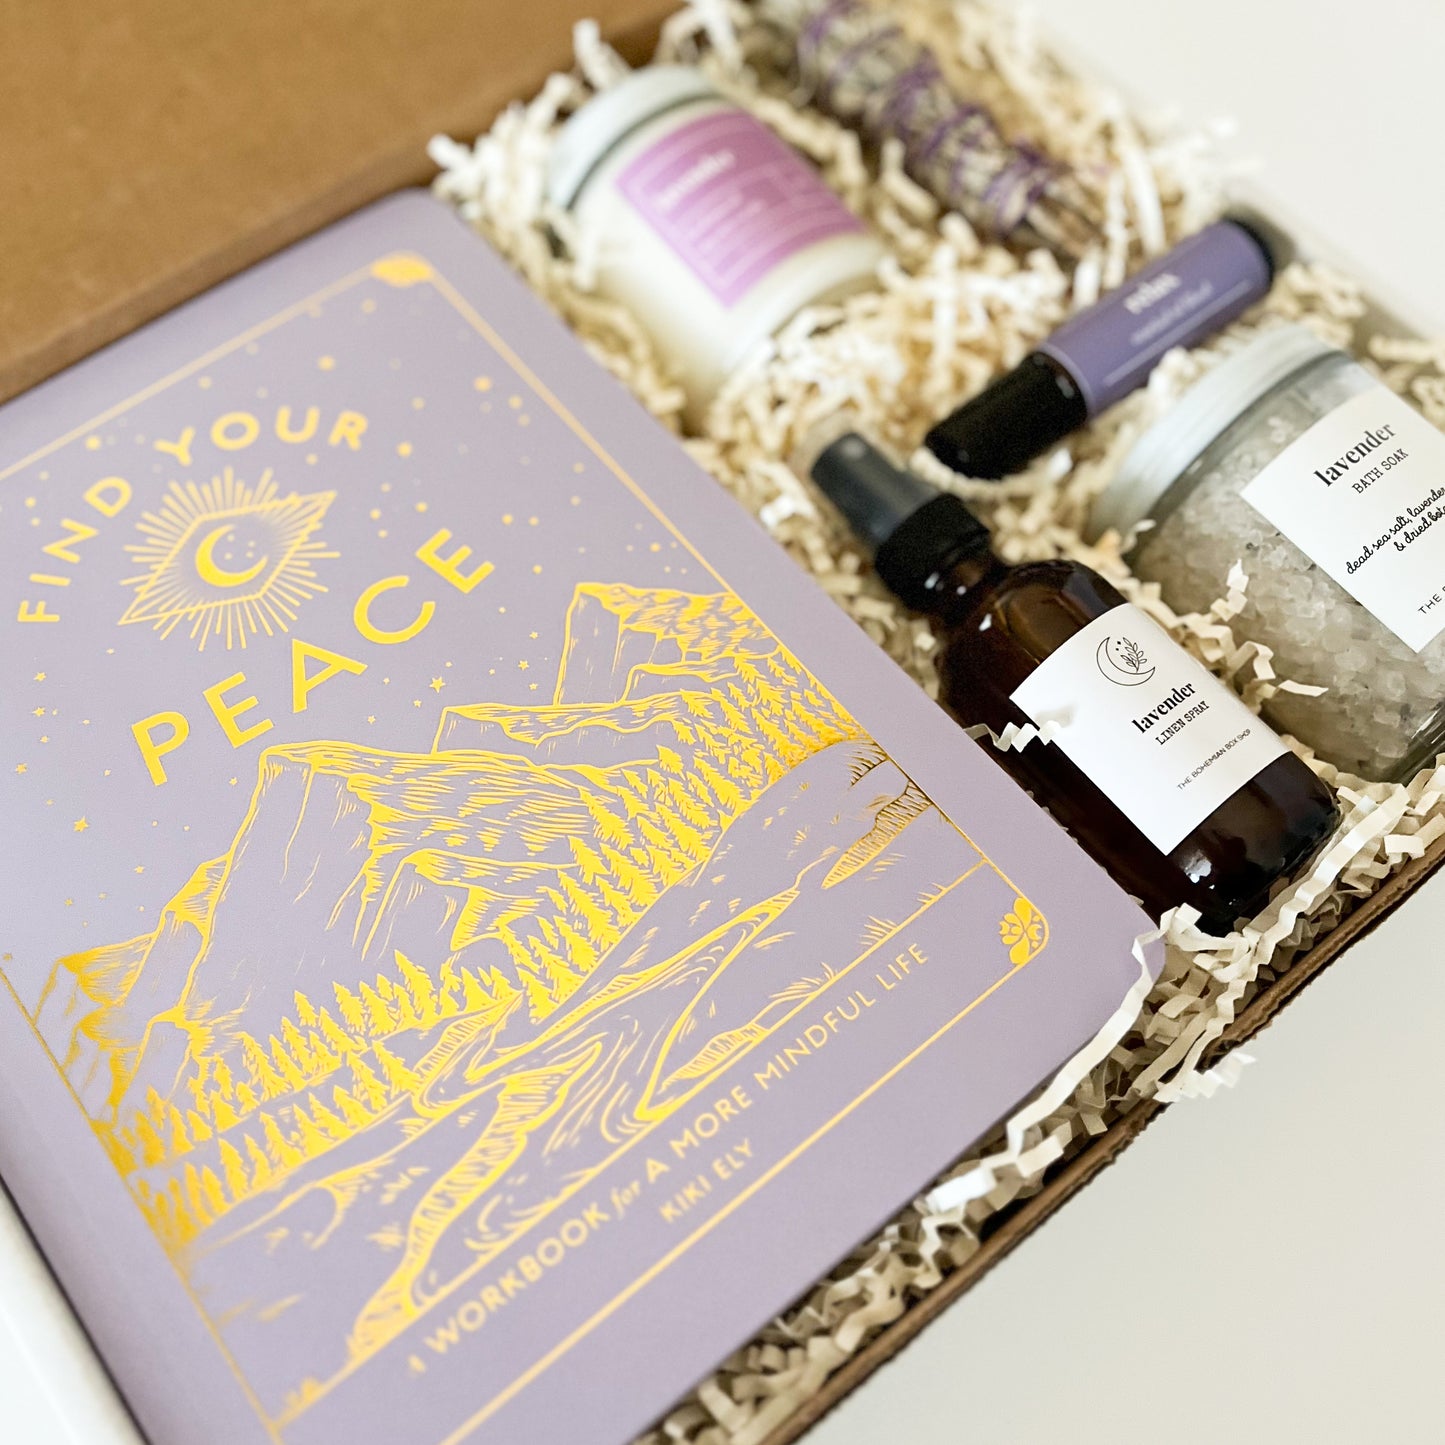 Find your peace mindfulness gift set. 